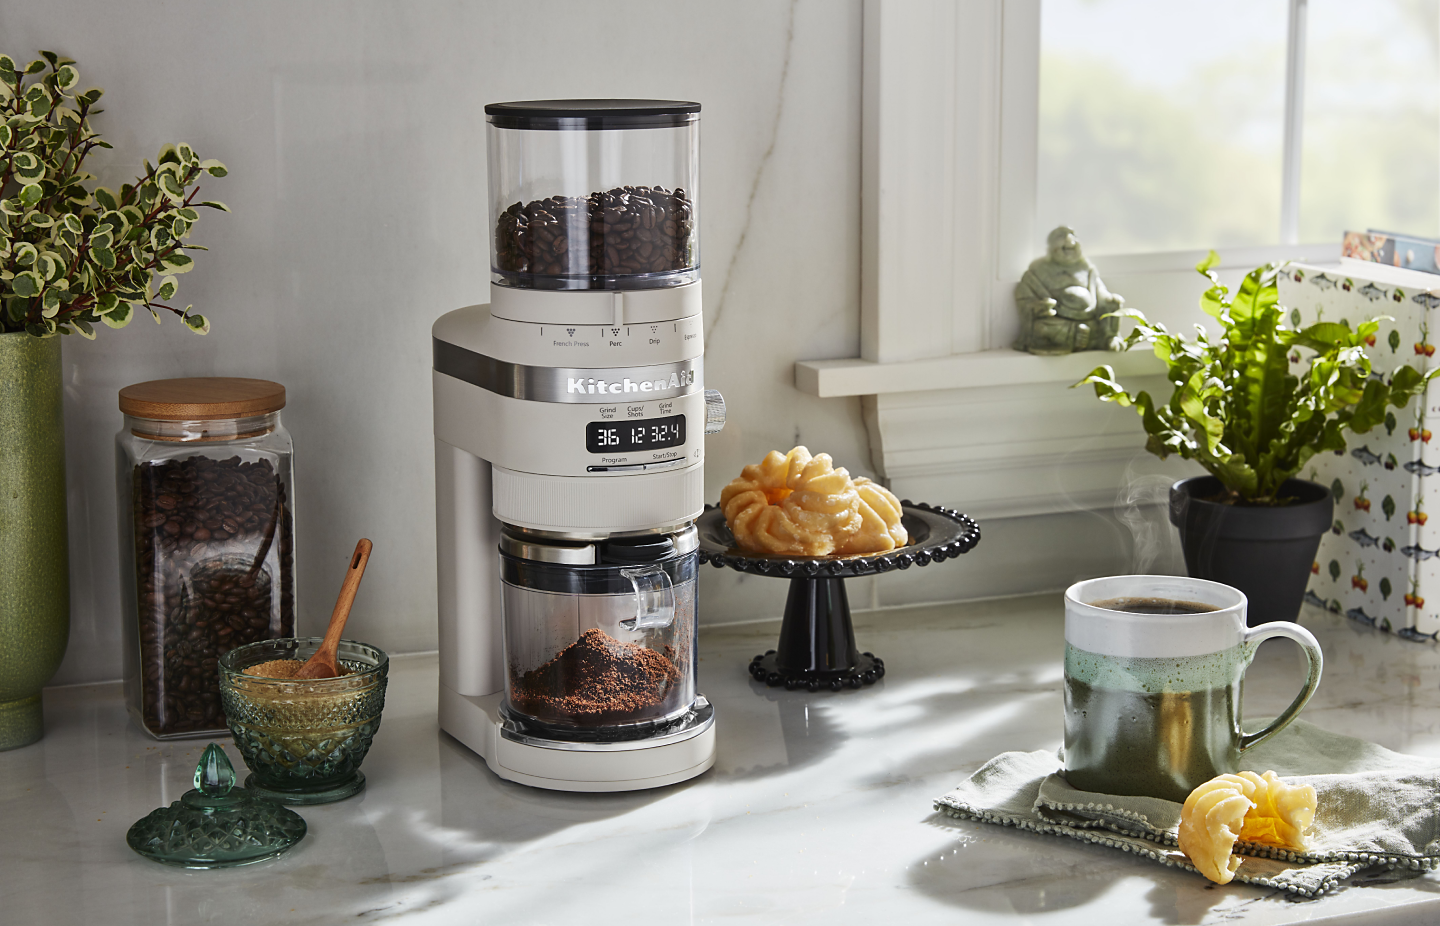 White KitchenAid® burr grinder next to a cup of coffee and pastries